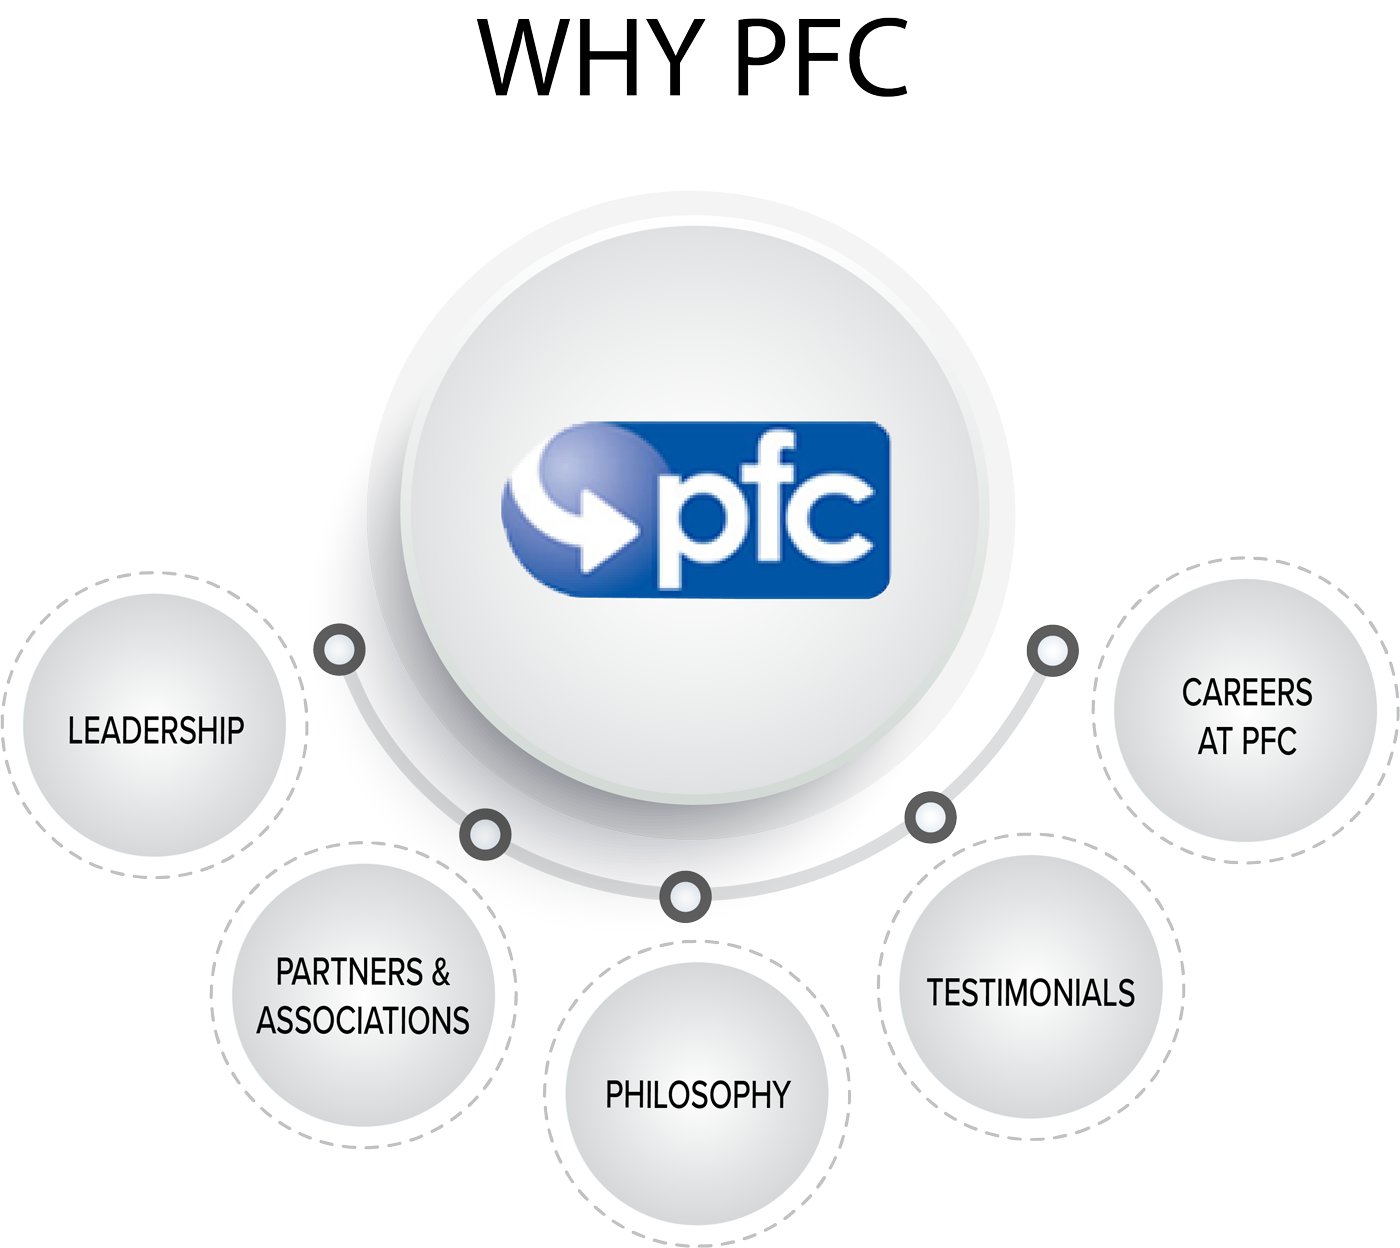 why pfc - Promotion Fulfillment Center